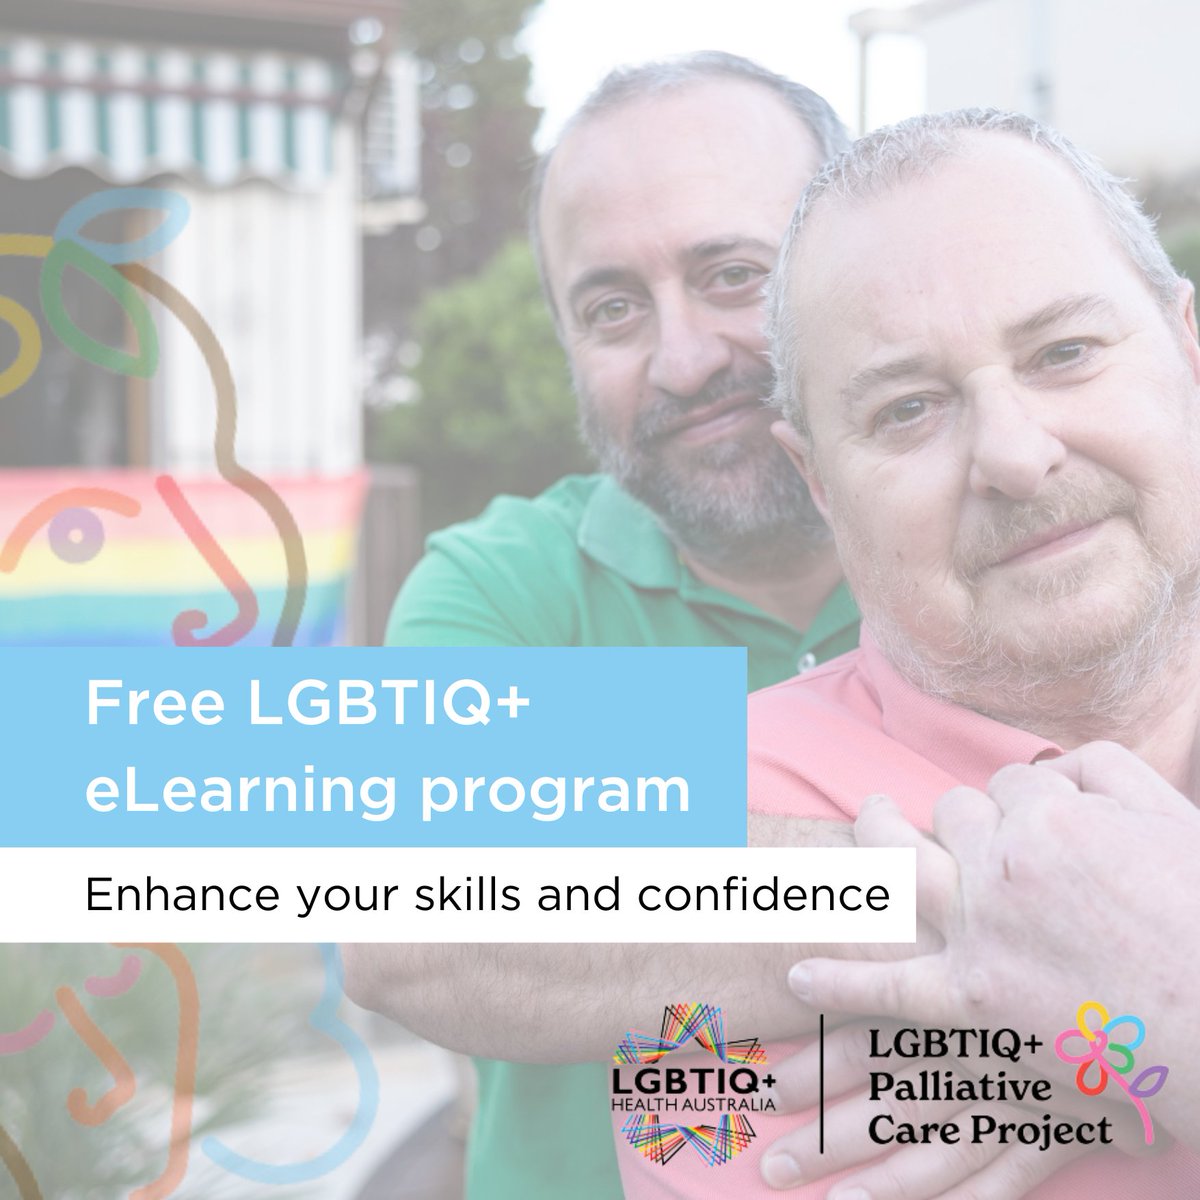 An innovative online training program has been launched by LGBTIQ+ Health Australia to help healthcare professionals deliver inclusive care for all Australians, with a specific focus on LGBTIQ+ communities. More ➡️ ow.ly/r8w150RjxU8